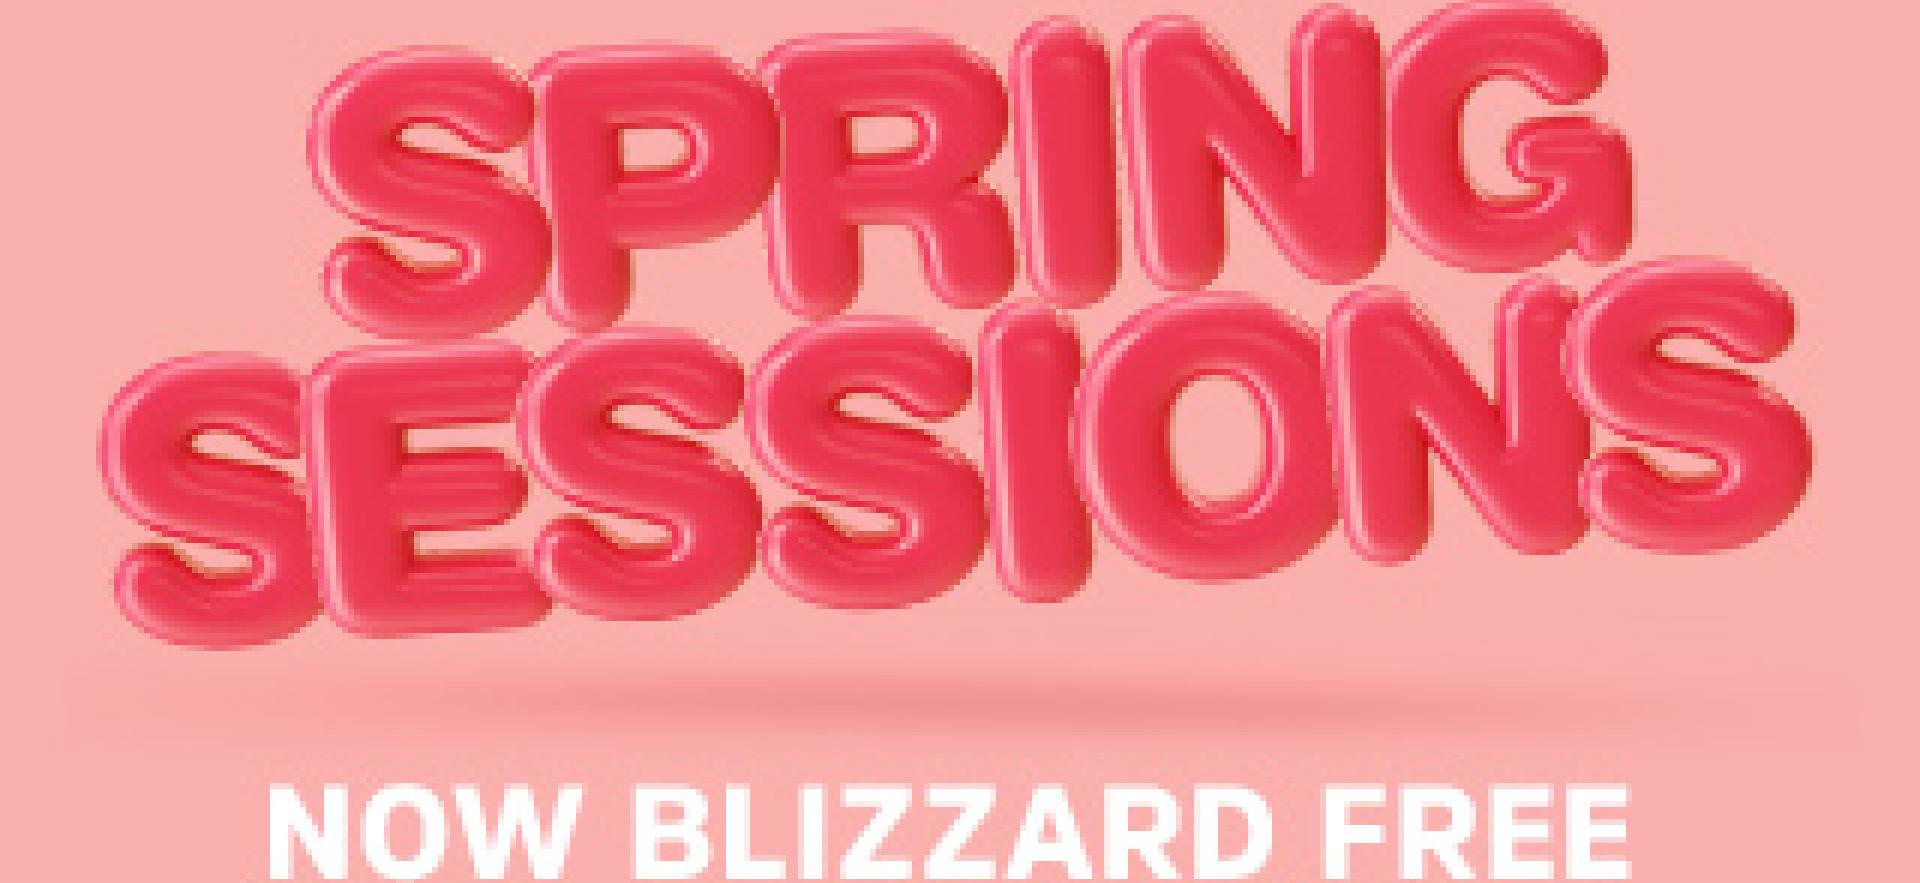 Spring Sessions title for open house